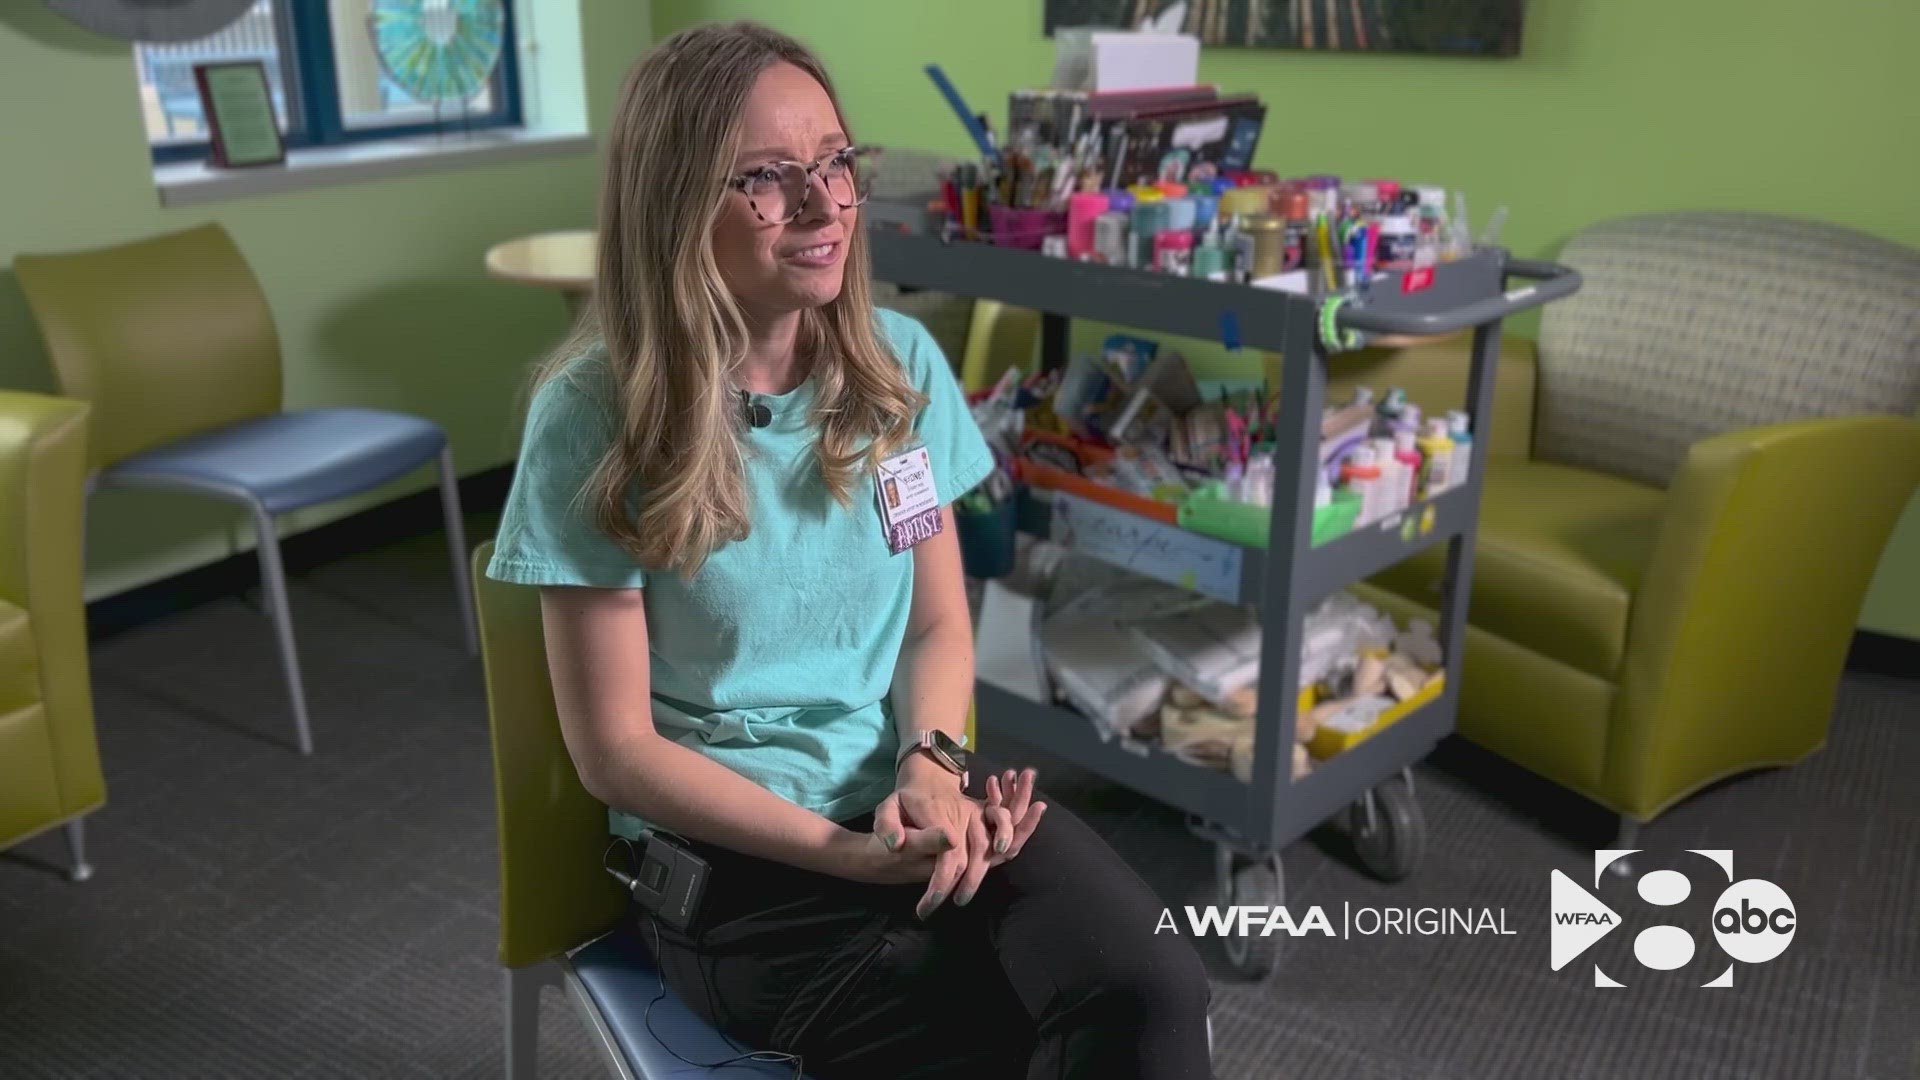 Artist Sydney Peel is a former patient herself and is using her own brand of magic to help pediatric patients.